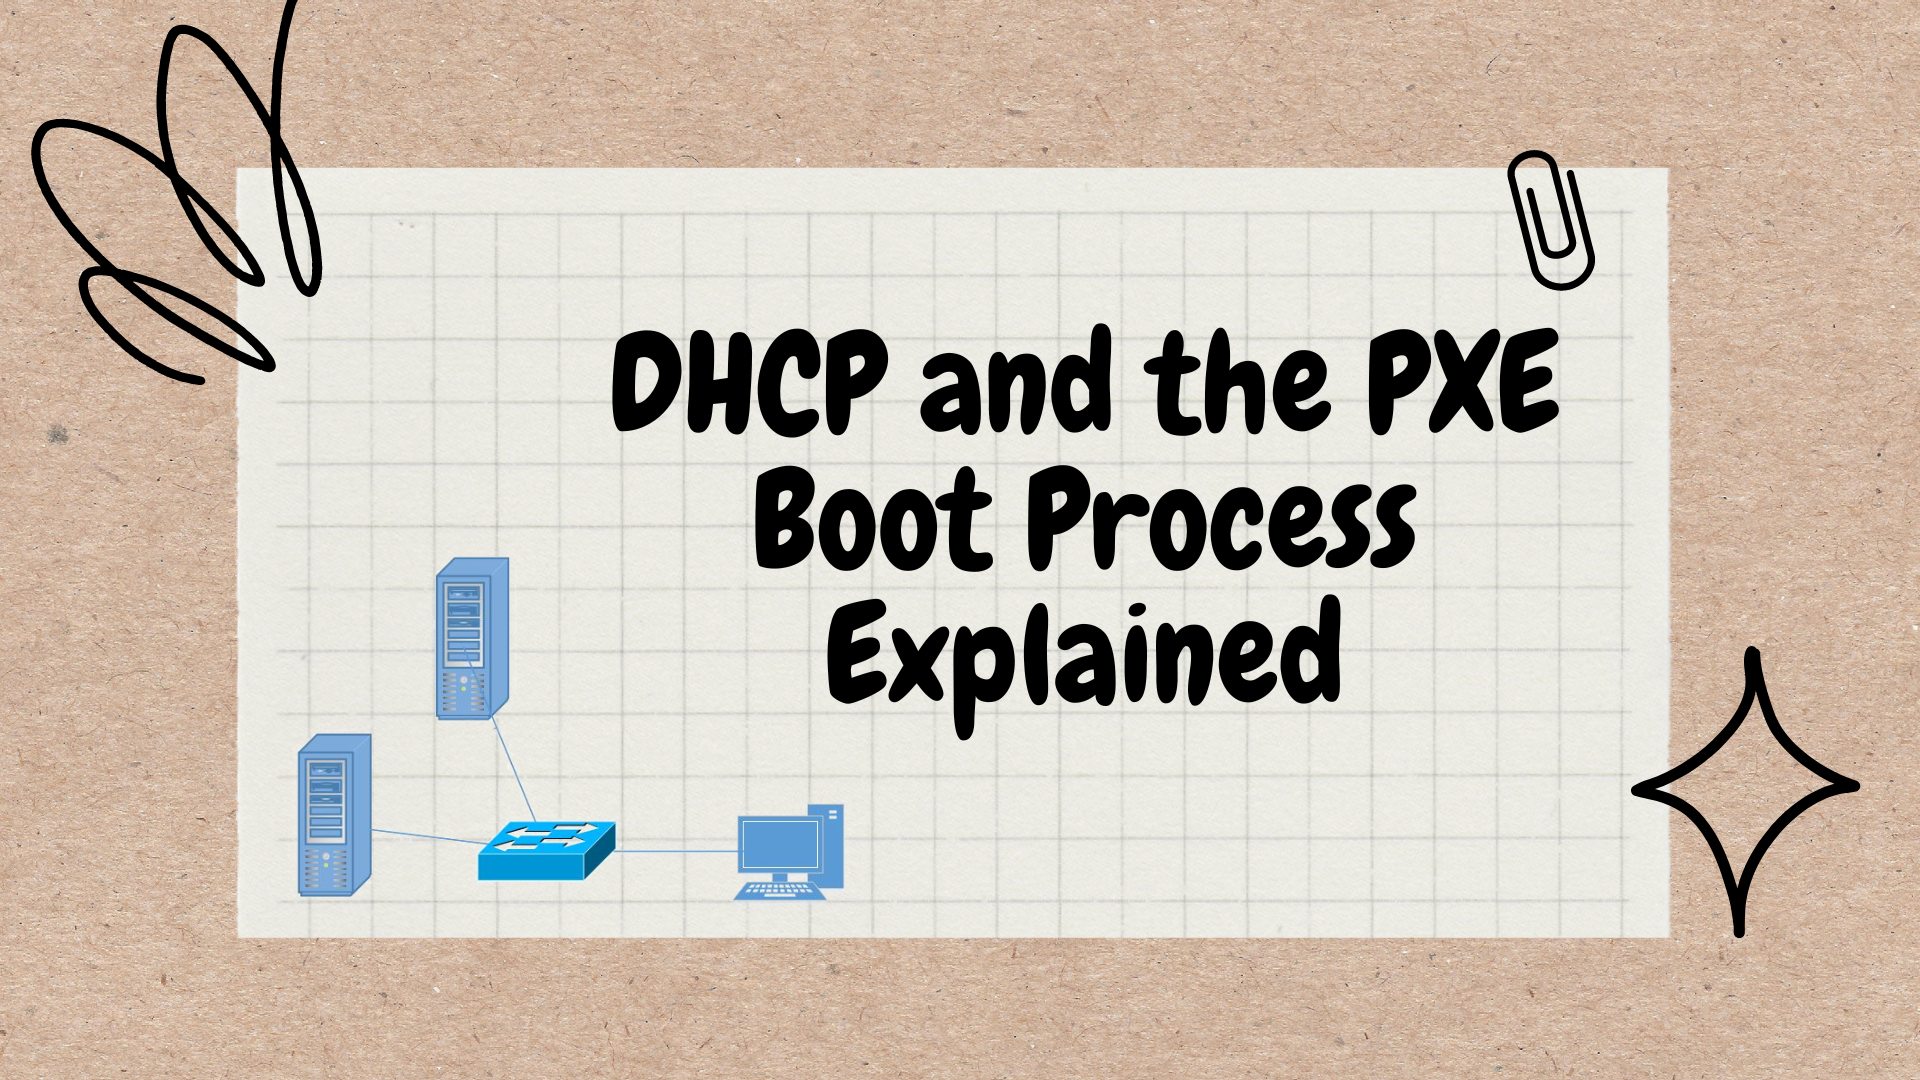 DHCP and the PXE Boot Process Explained